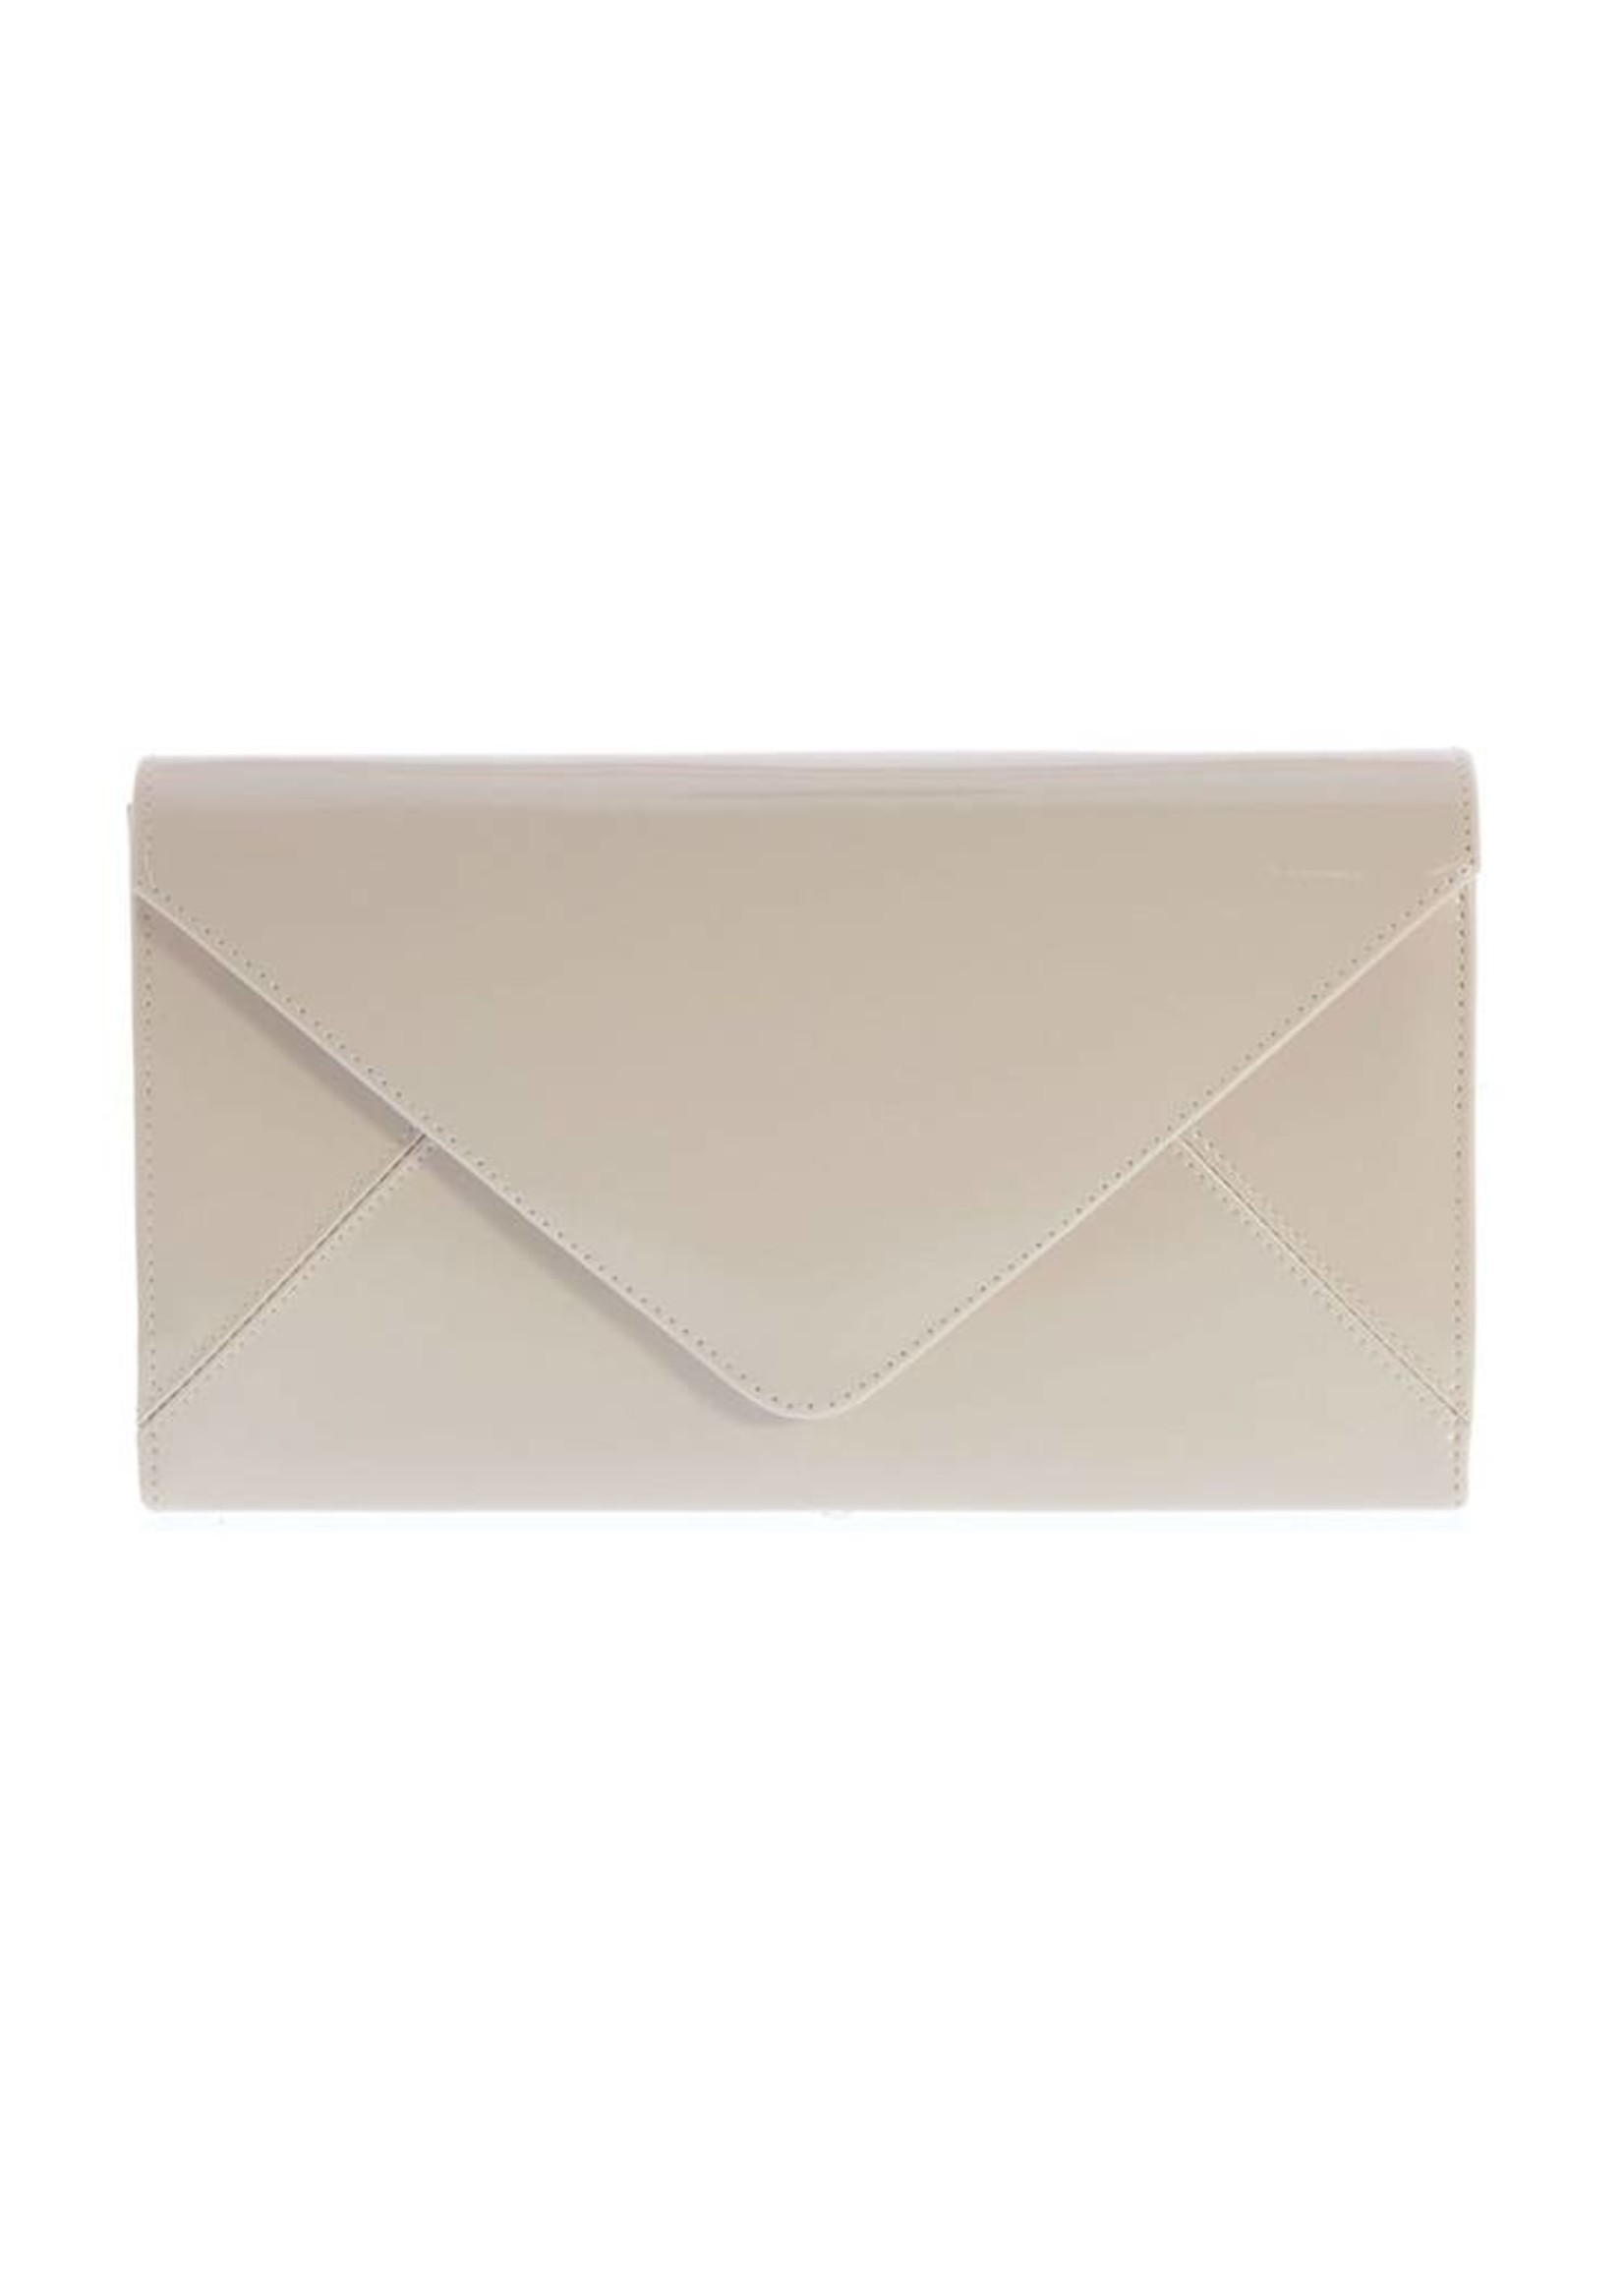 Gabee Products Keeley Patent Envelope Clutch